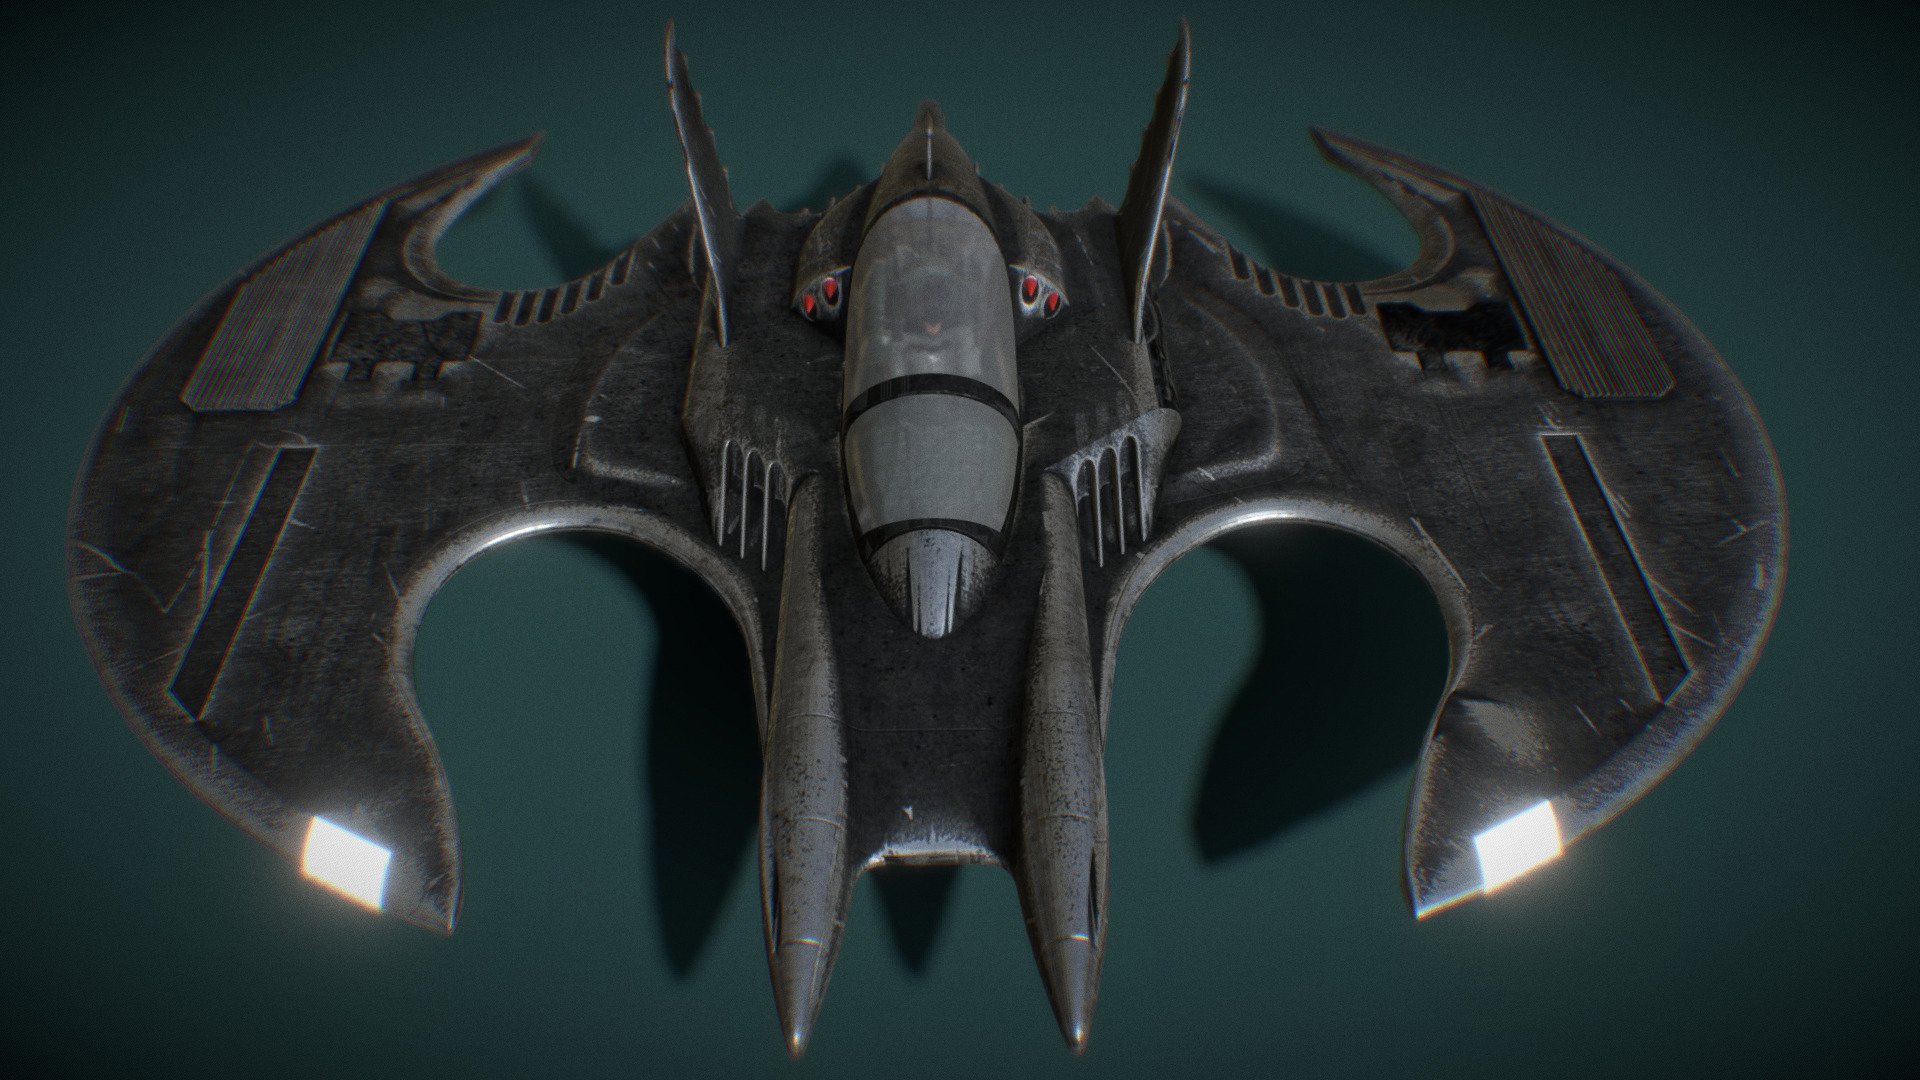 High-quality Batwing fan art from the film Batman 1989

Ready for rendering
This is not a Printable version

PBR model textured and animated

Zip file contains obj, max and fbx format with textures.

If you have any questions please don’t hesitate to contact me. 
I will respond you ASAP.
I encourage you to check my other 3D models 3d model